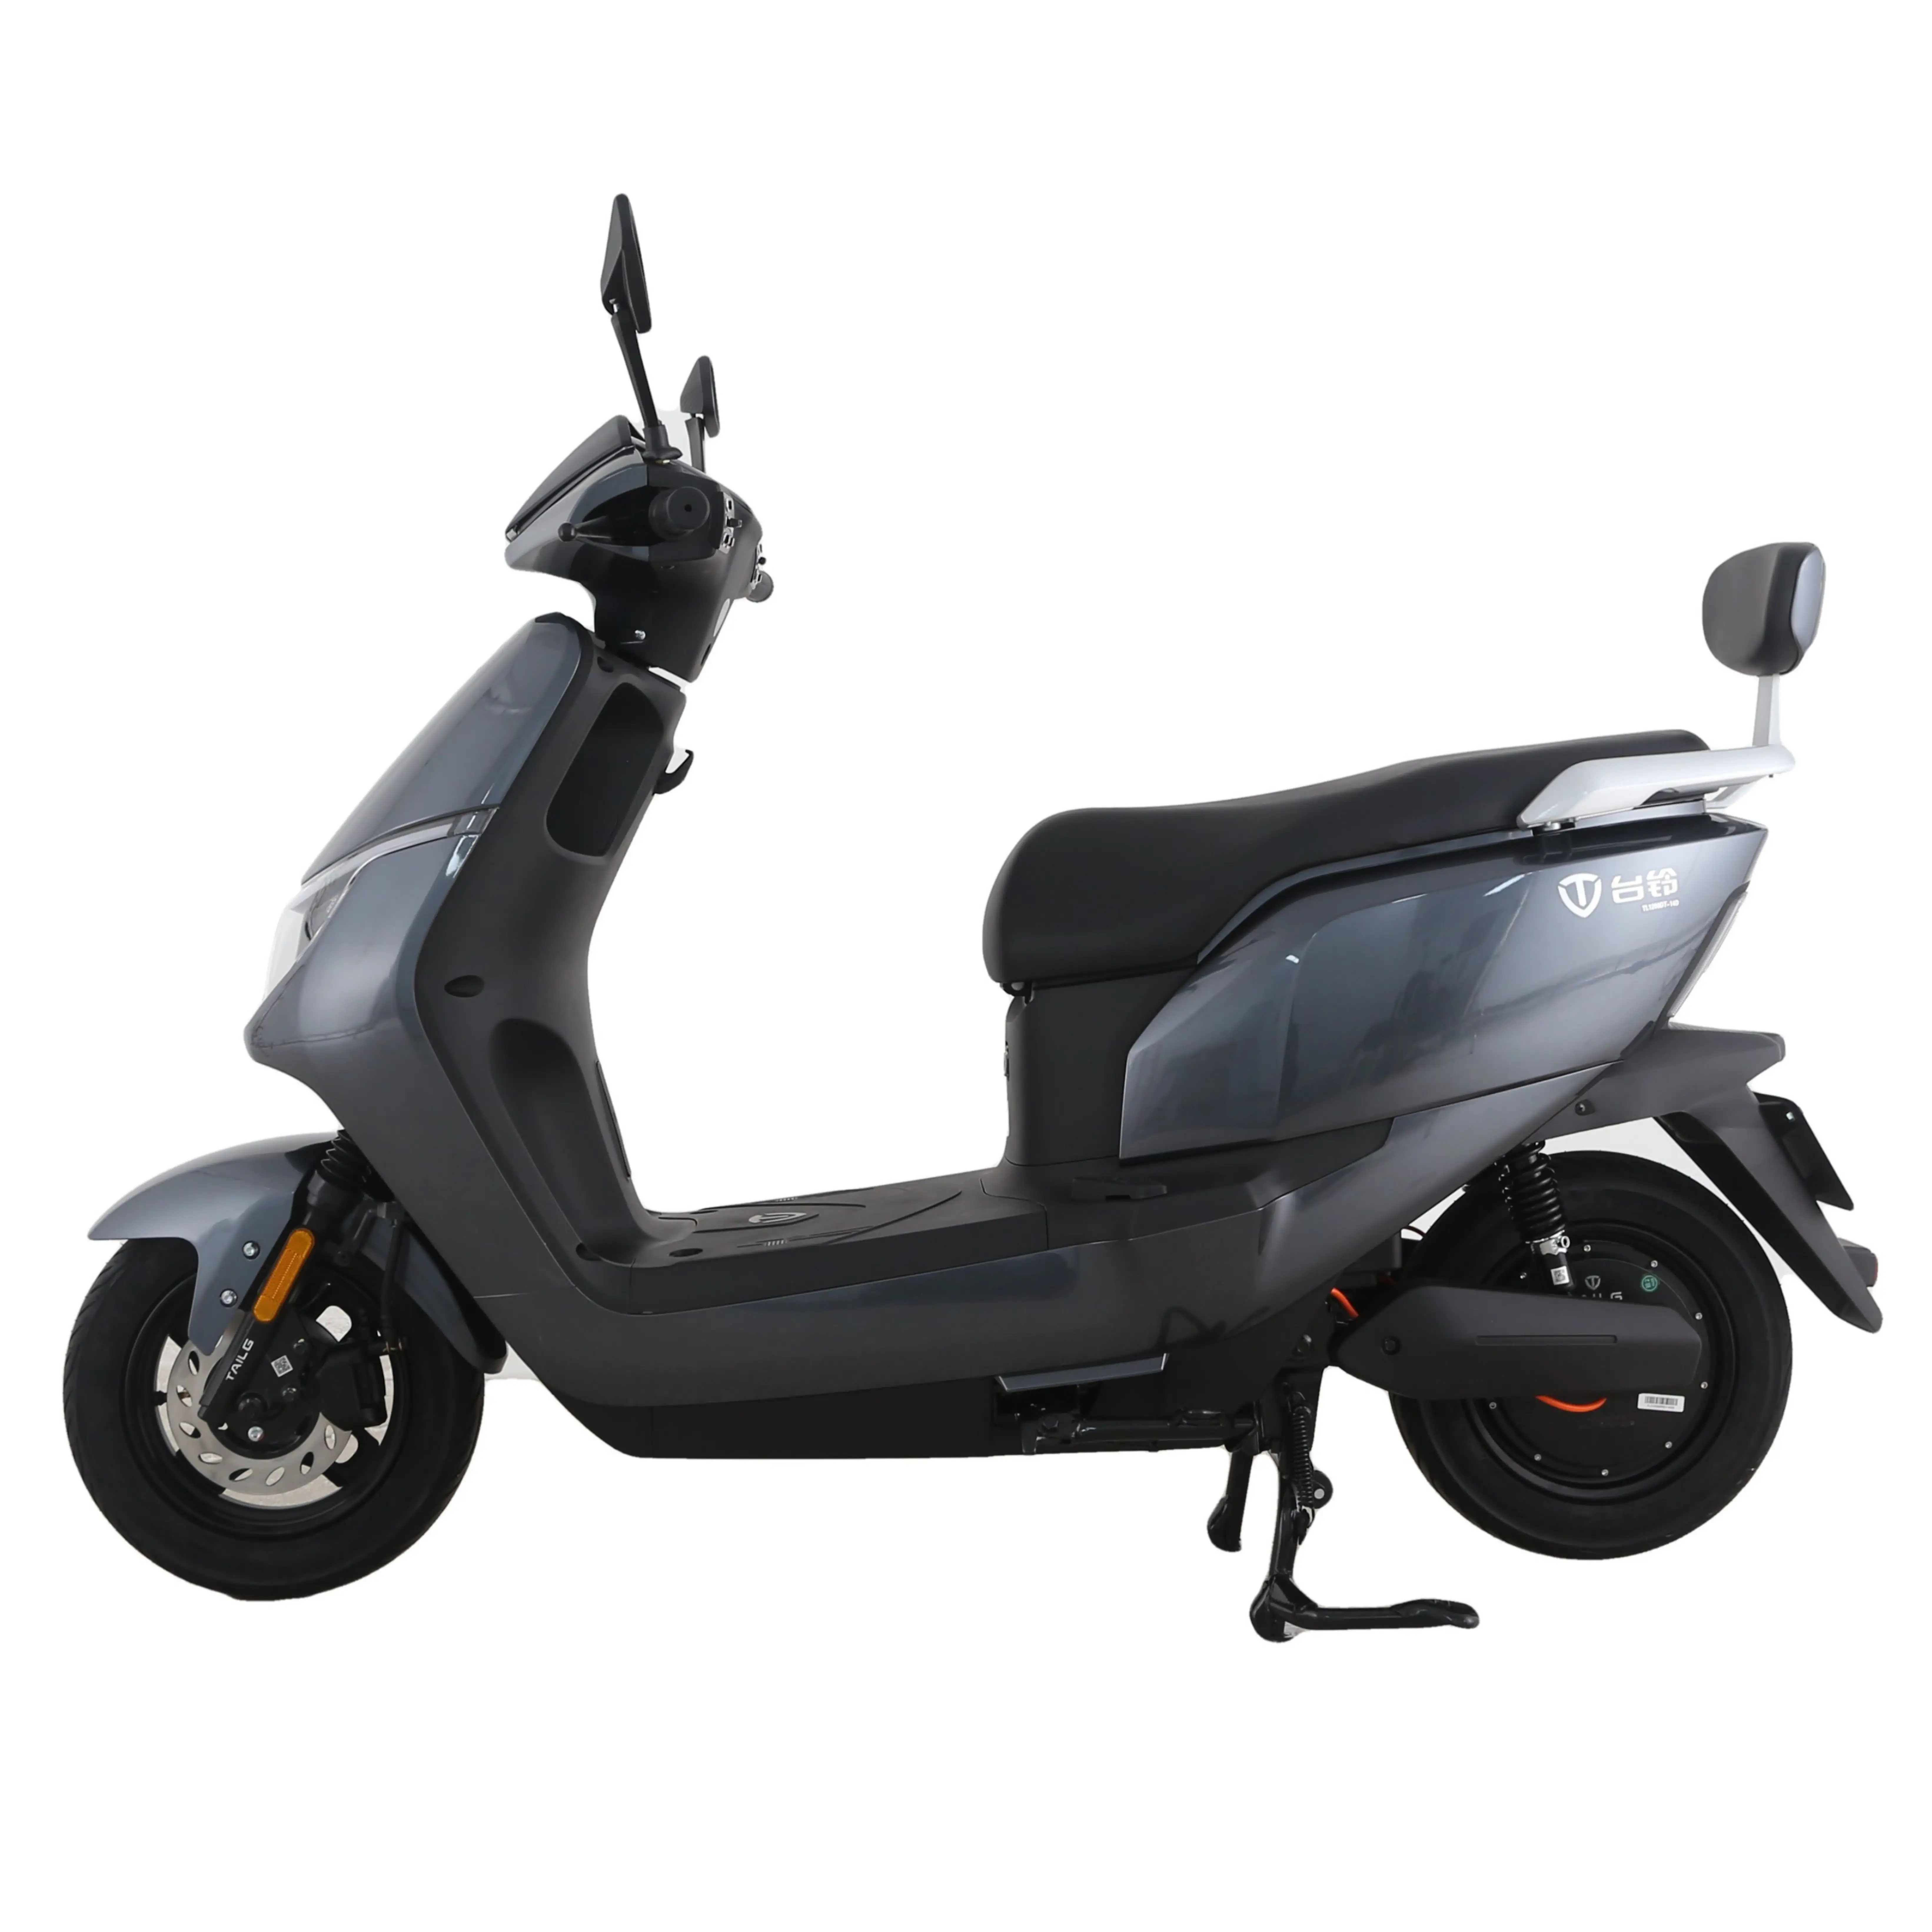 TAILG High Quality Long Range 1200W 125CC 250CC Battery E Mopeds Scooter Electric Motorcycle For Adults Sales